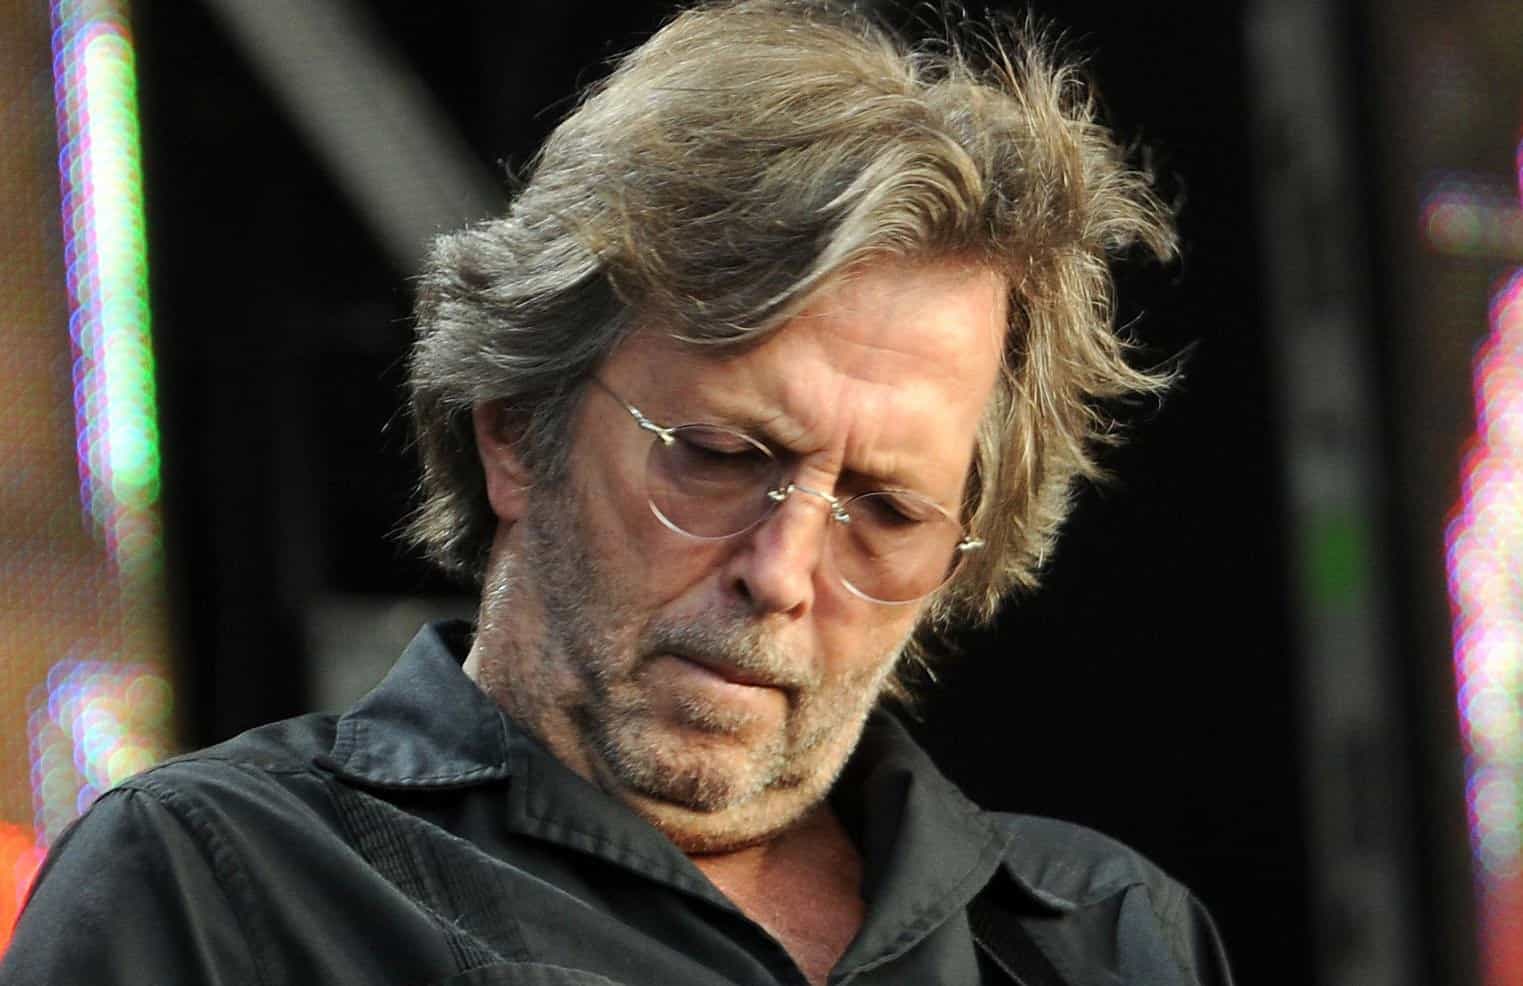 Eric Clapton declares he won’t play venues that require vaccine proof